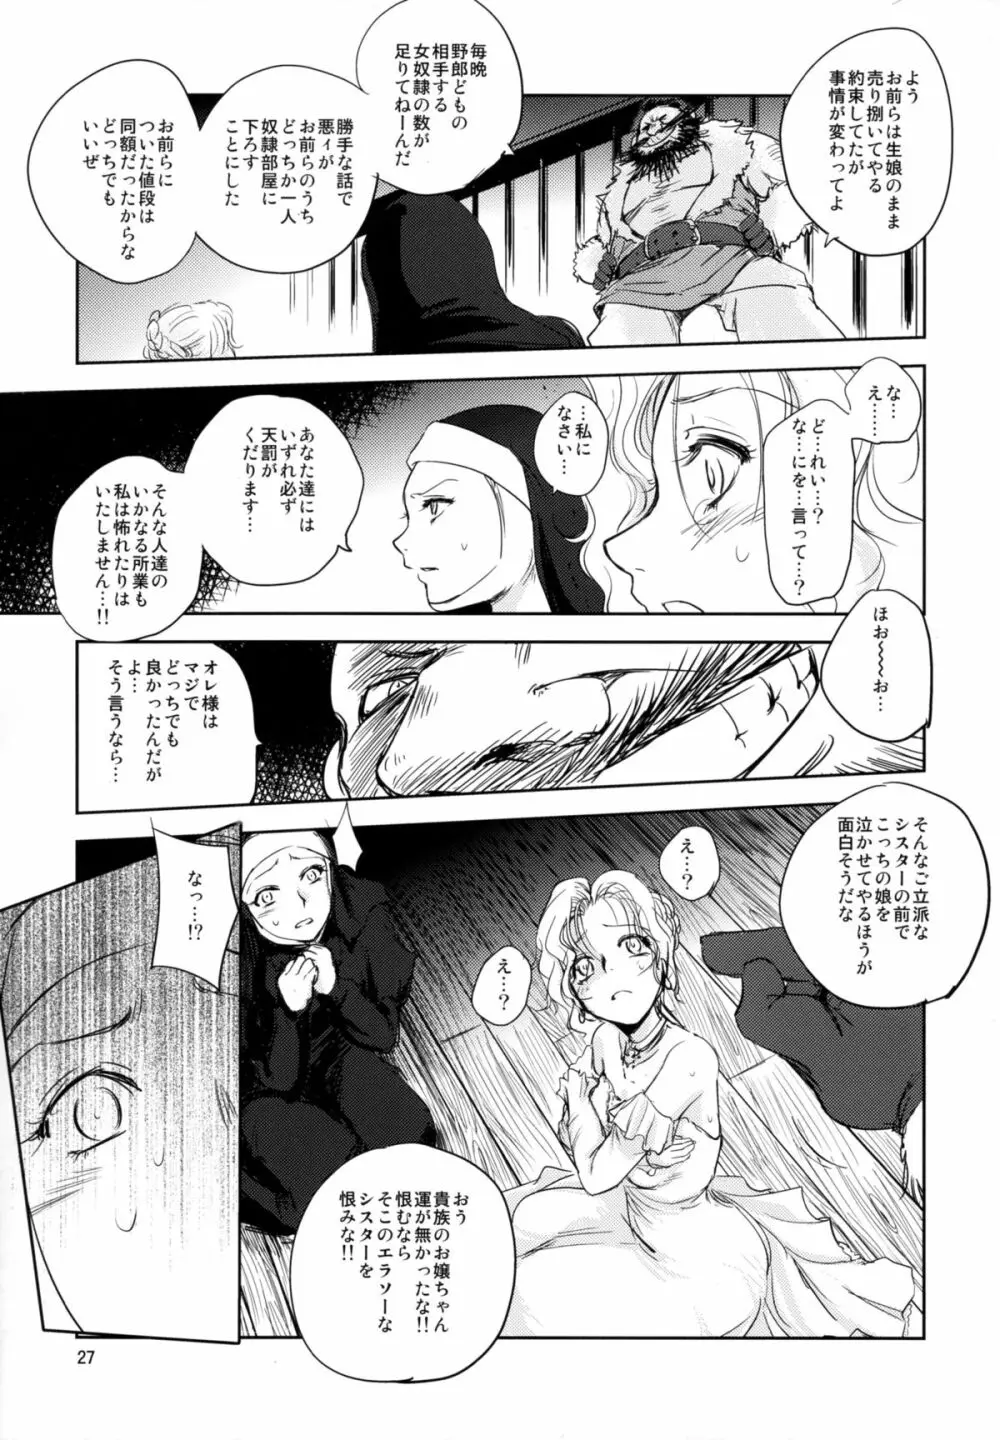 GRASSEN'S WAR ANOTHER STORY Ex #05 ノード侵攻 V Page.27